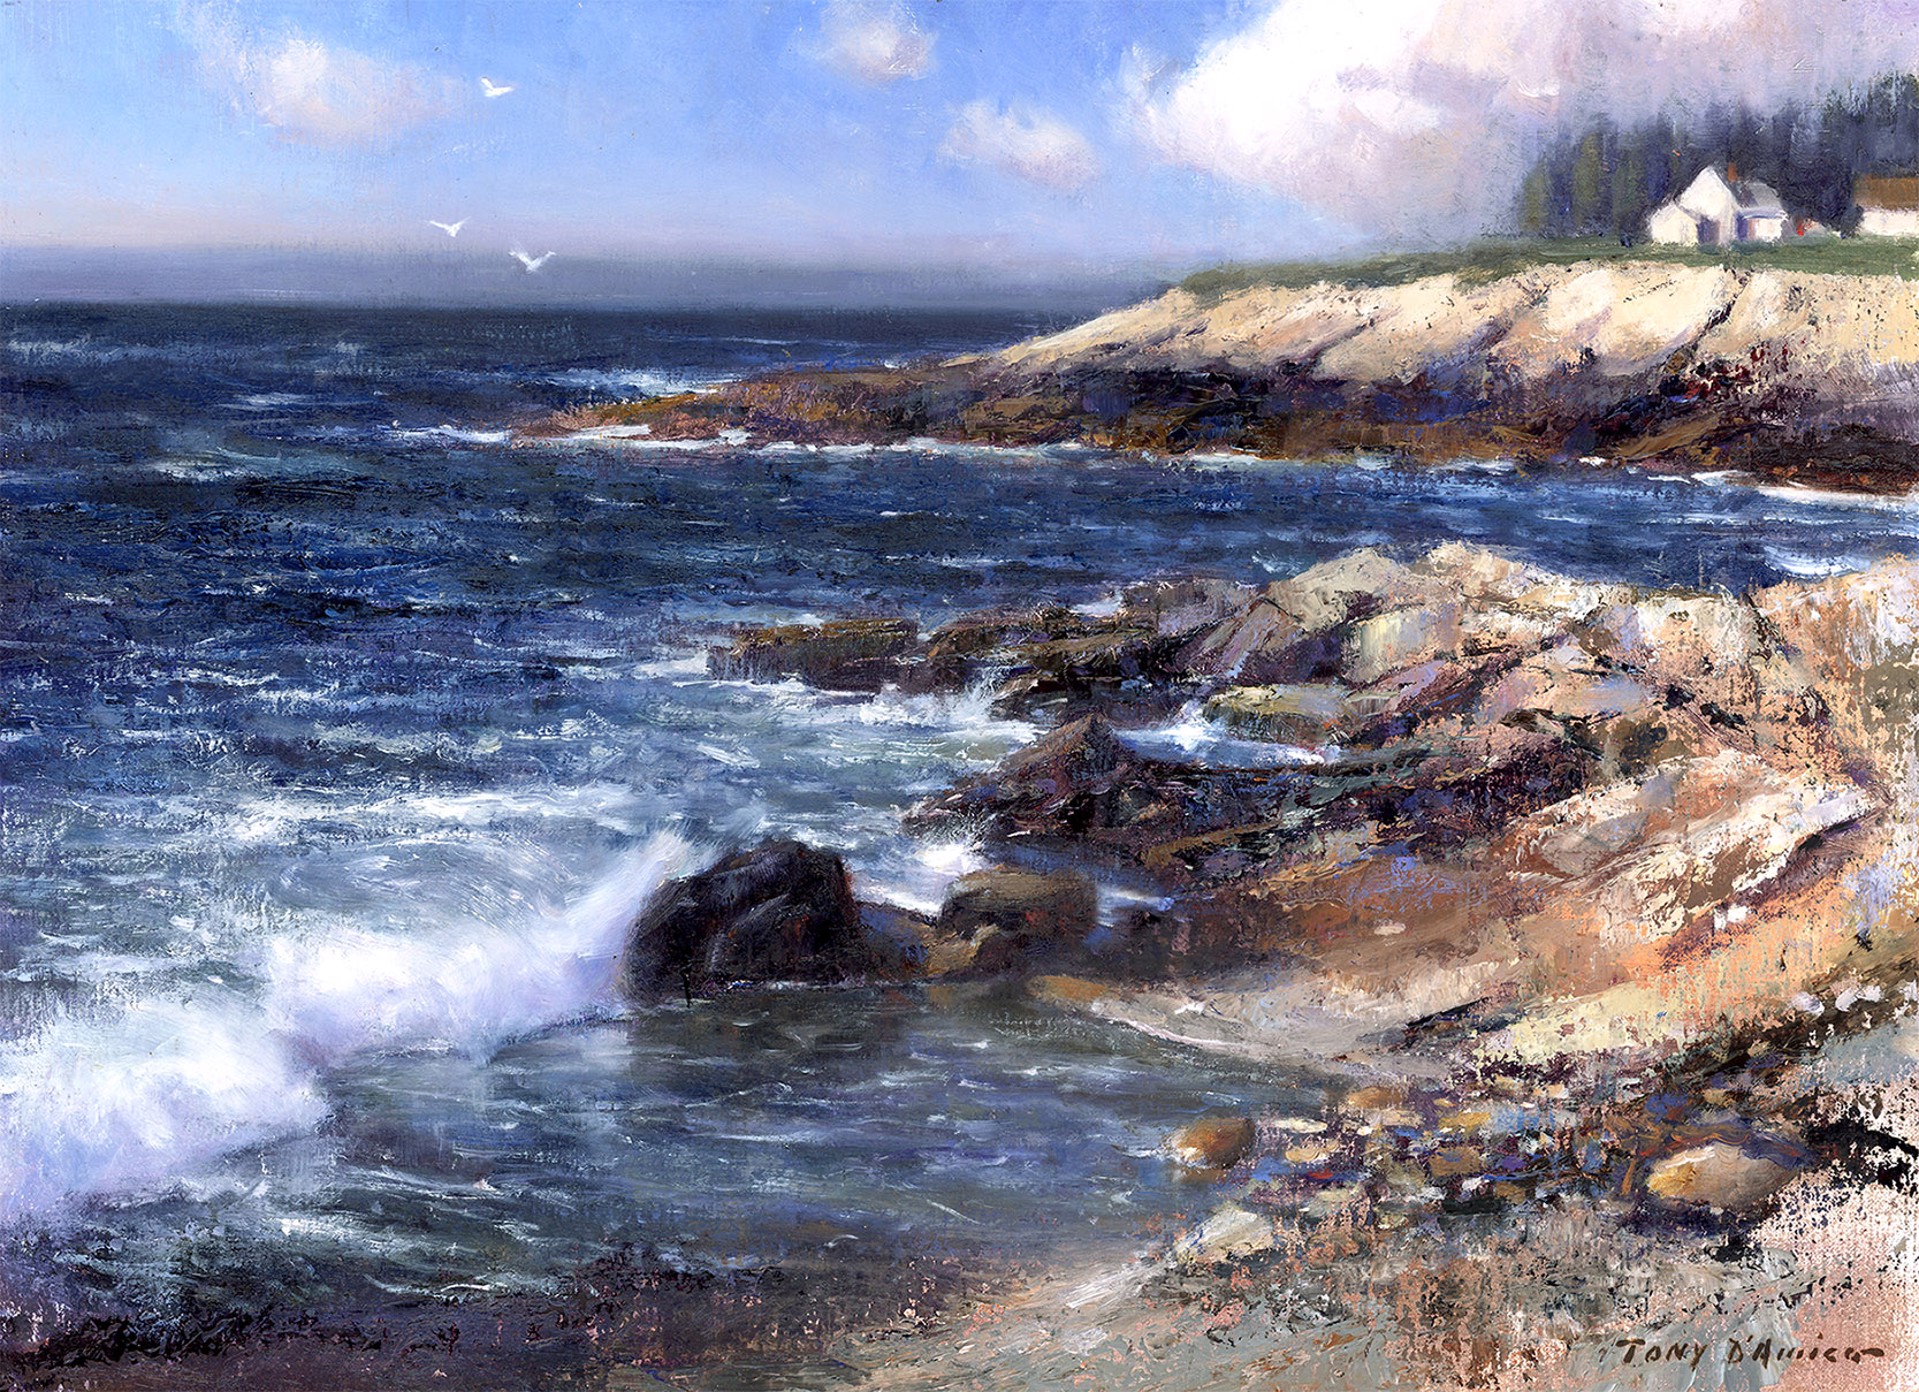 Tony D'Amico "At Ocean Point" by Oil Painters of America